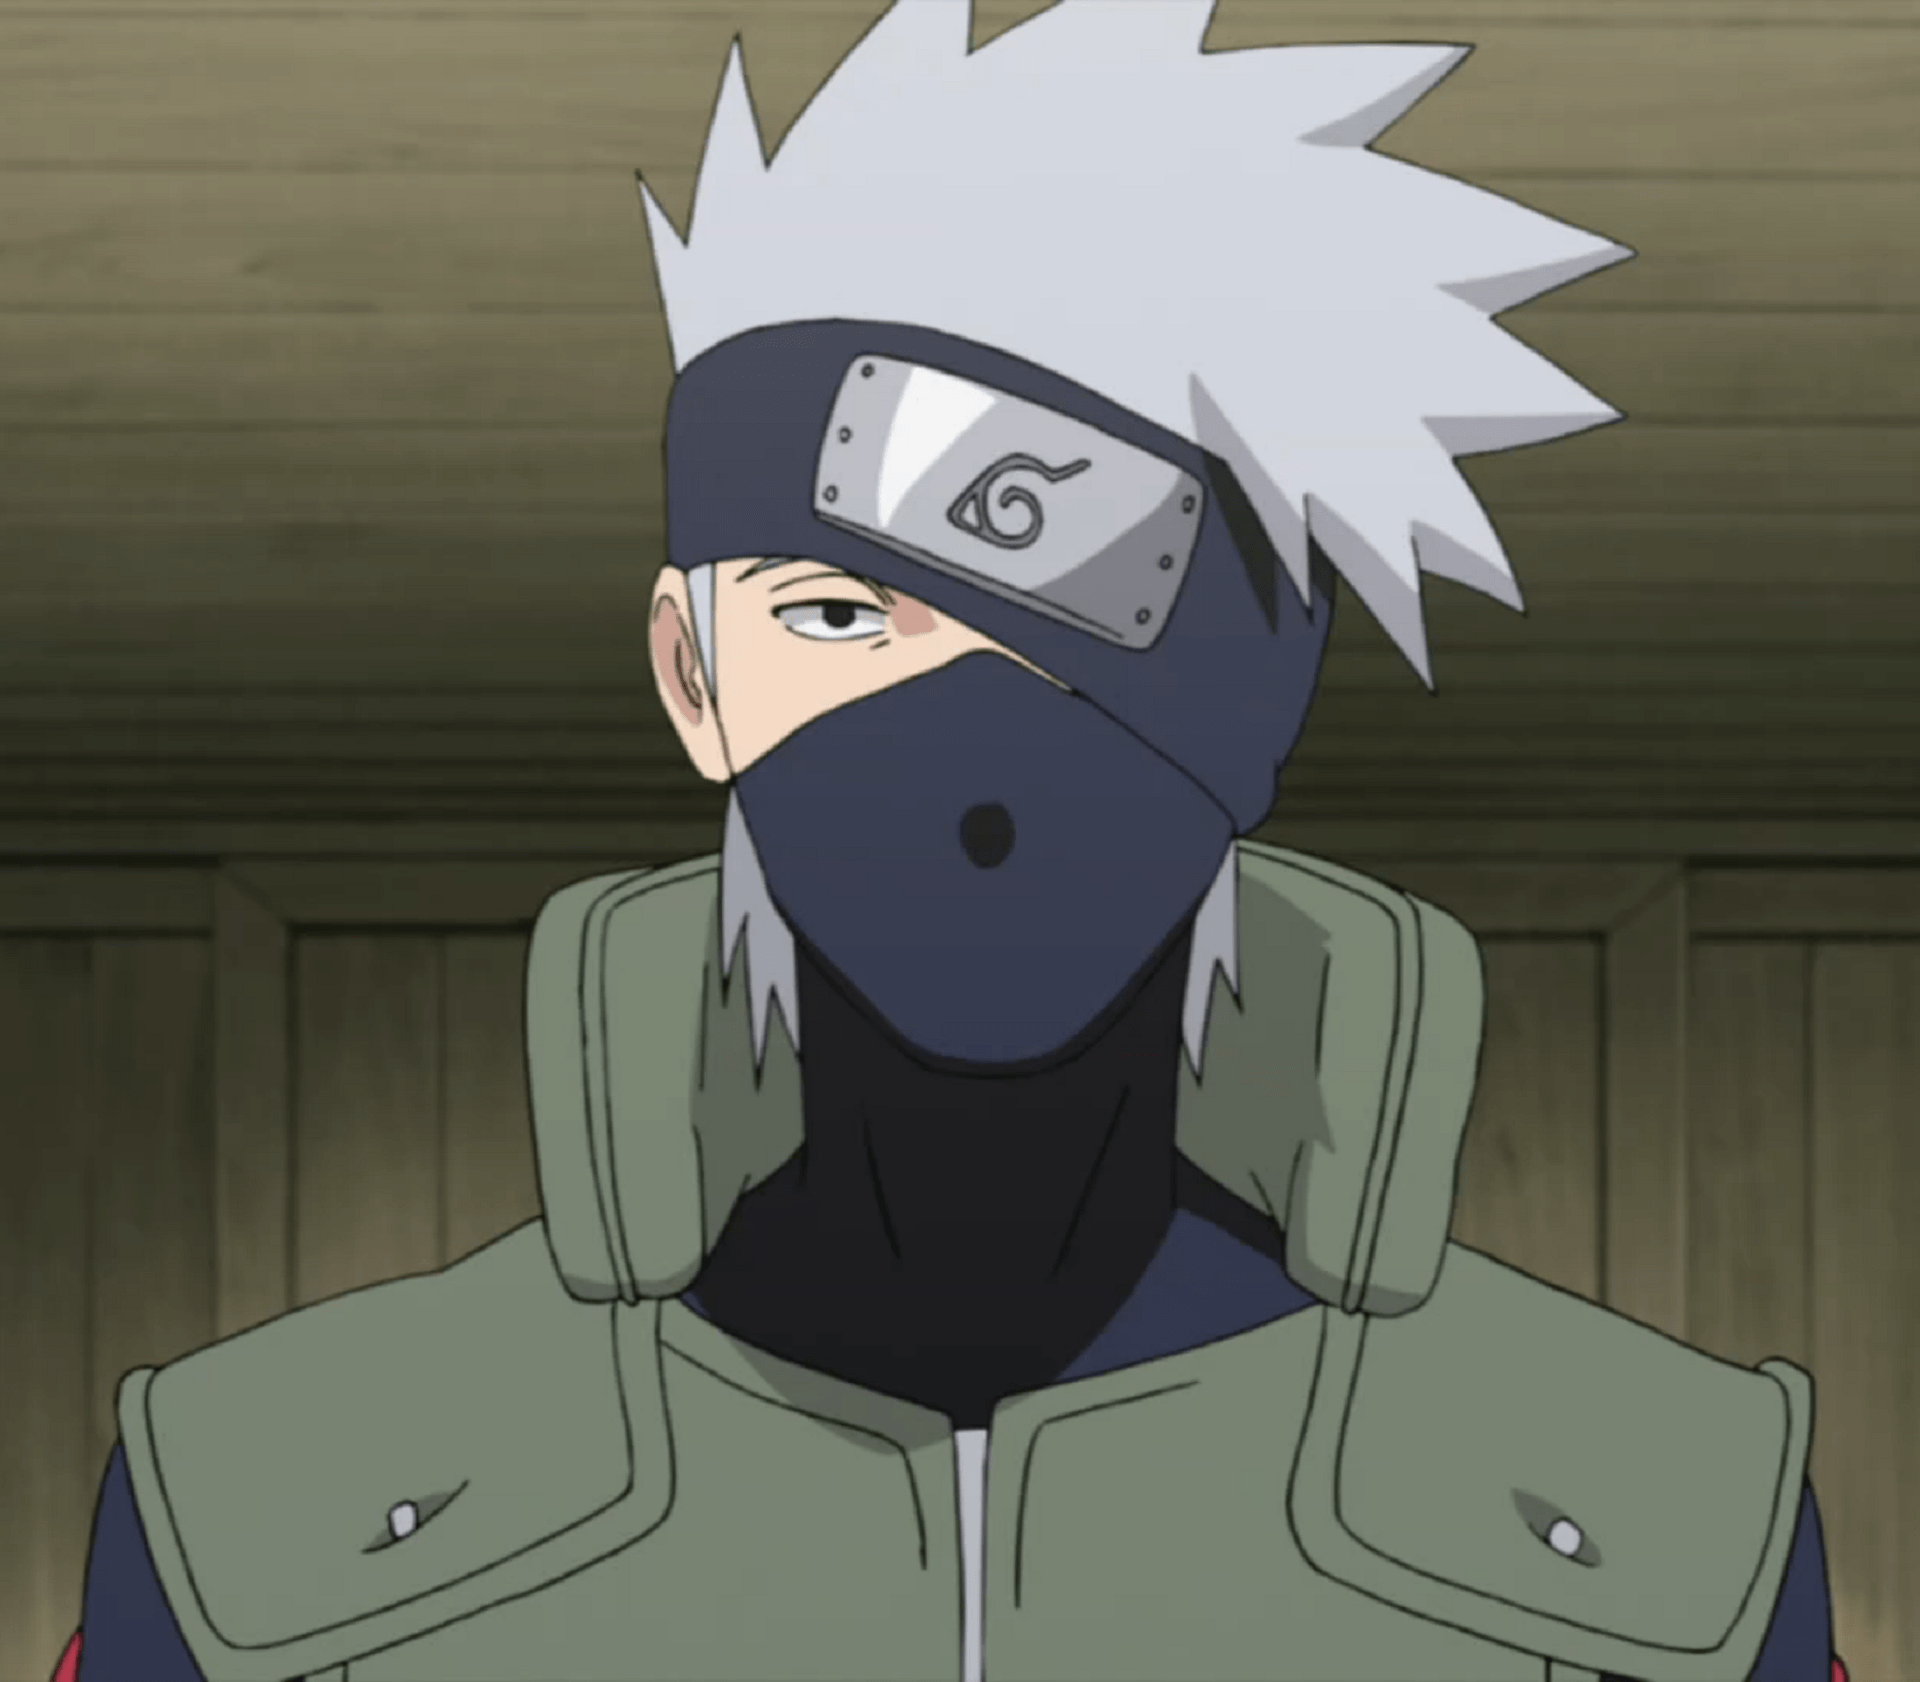 Image: Is Kakashi Hatake's complete face ever shown? - Quora